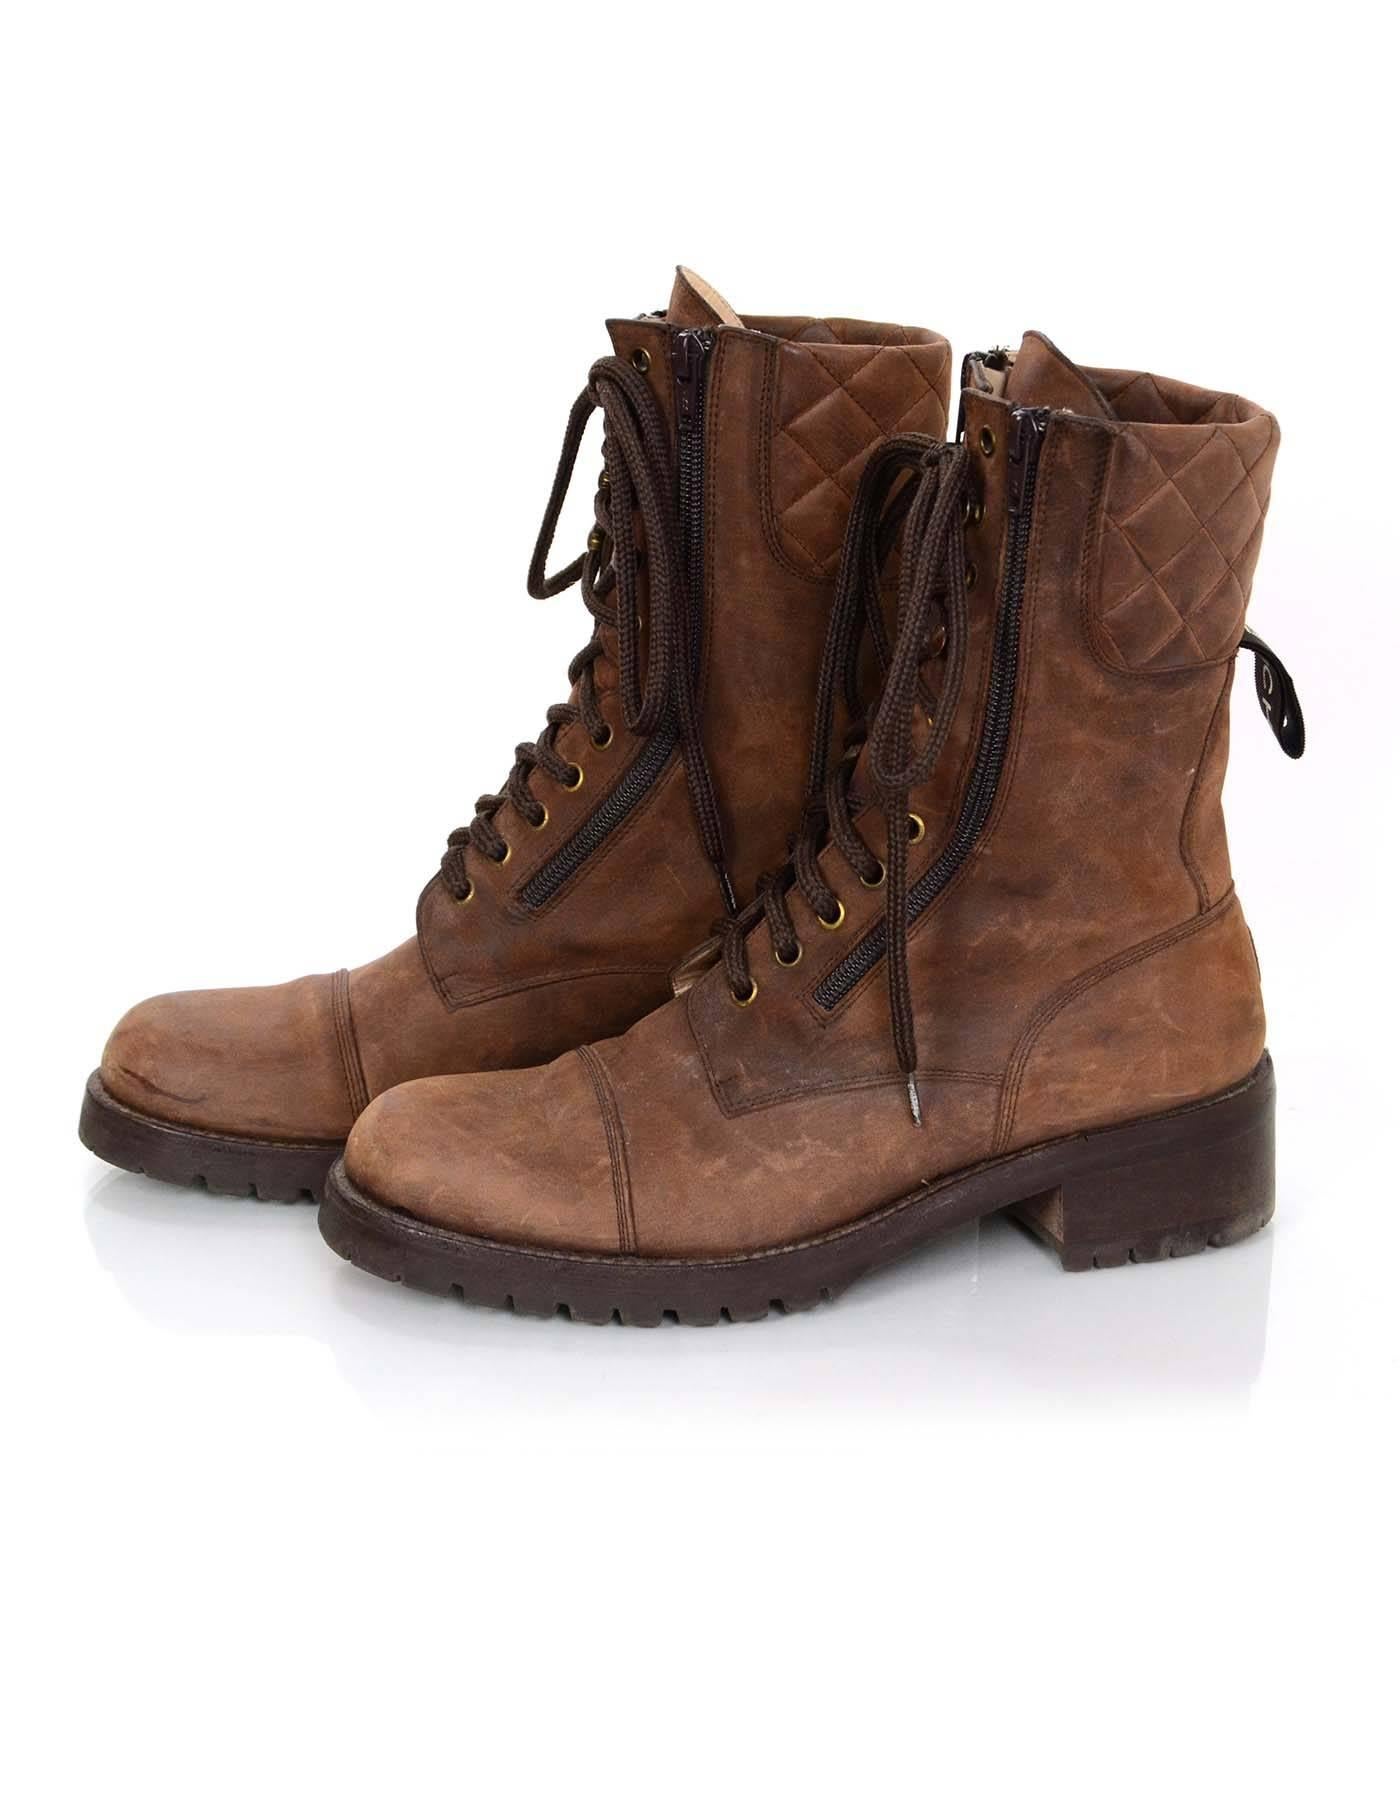 Chanel Brown Vintage Combat Boots Sz 40

Made In: Spain
Color: Brown
Materials: Suede, rubber
Closure/Opening: Double zip and lace-tie closure
Sole Stamp: Chanel made in spain
Overall Condition: Very good pre-owned vintage condition with the